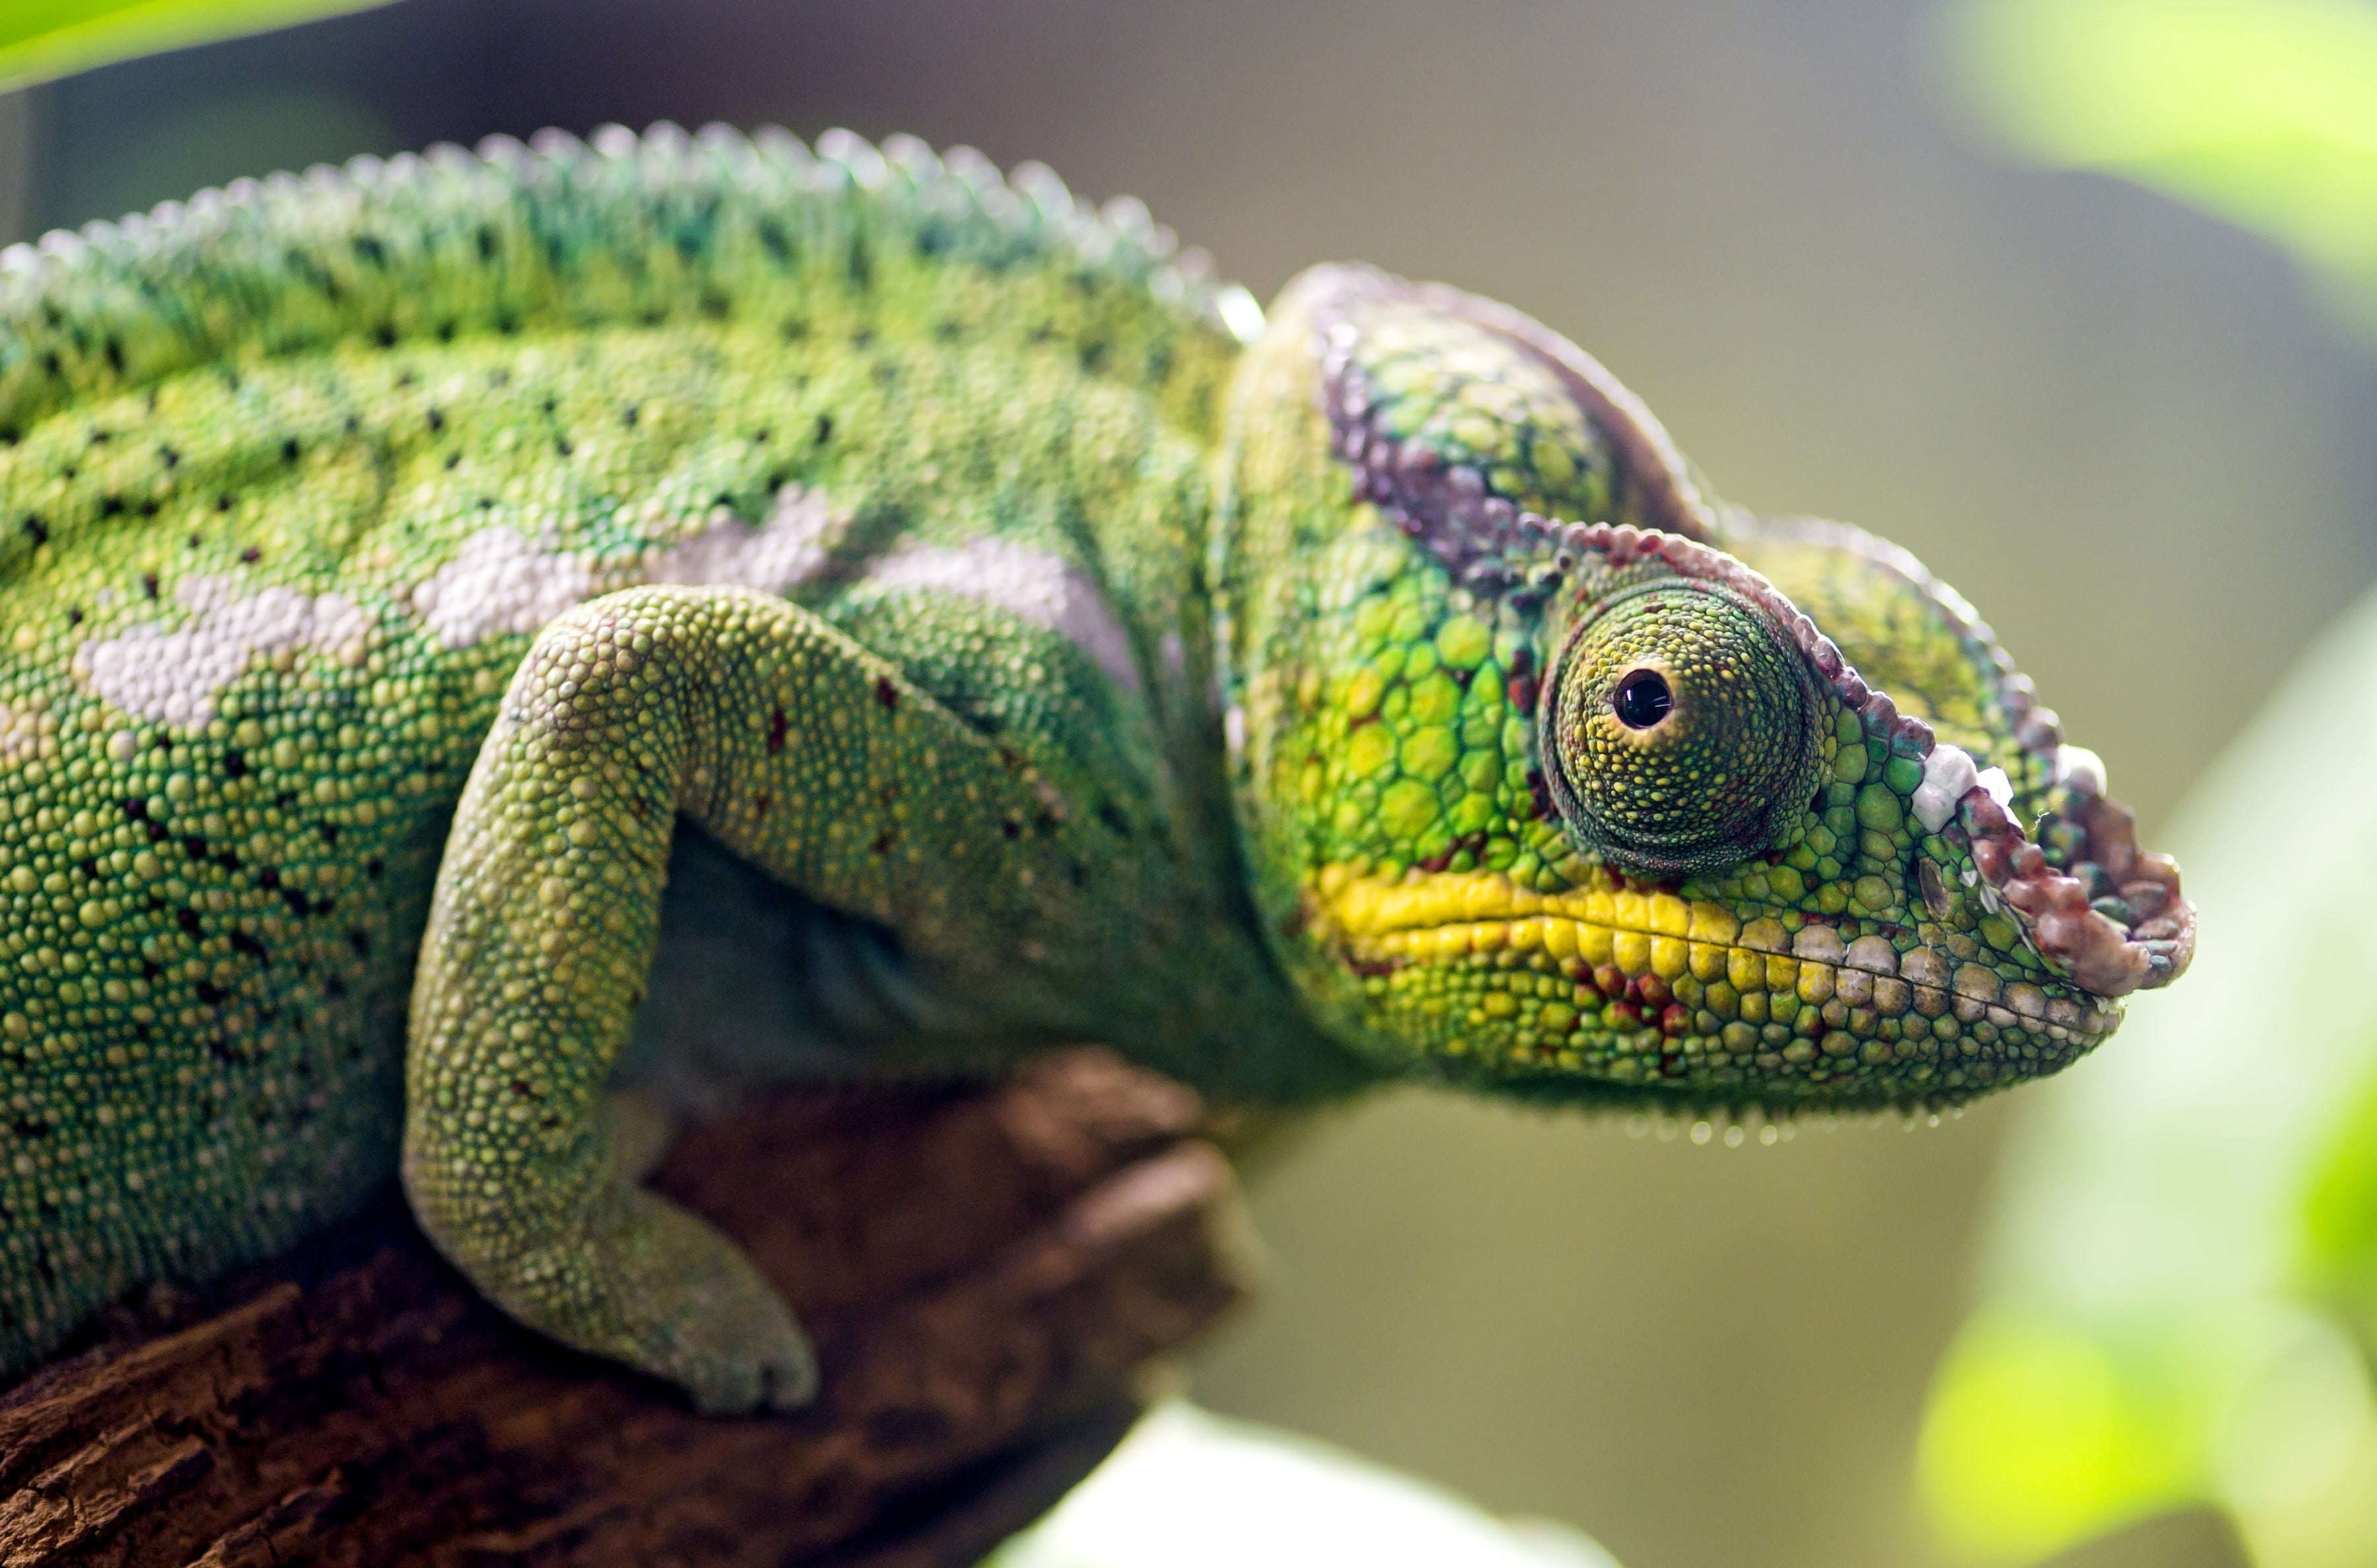 green chameleon, panther chameleon closeup photography, nature